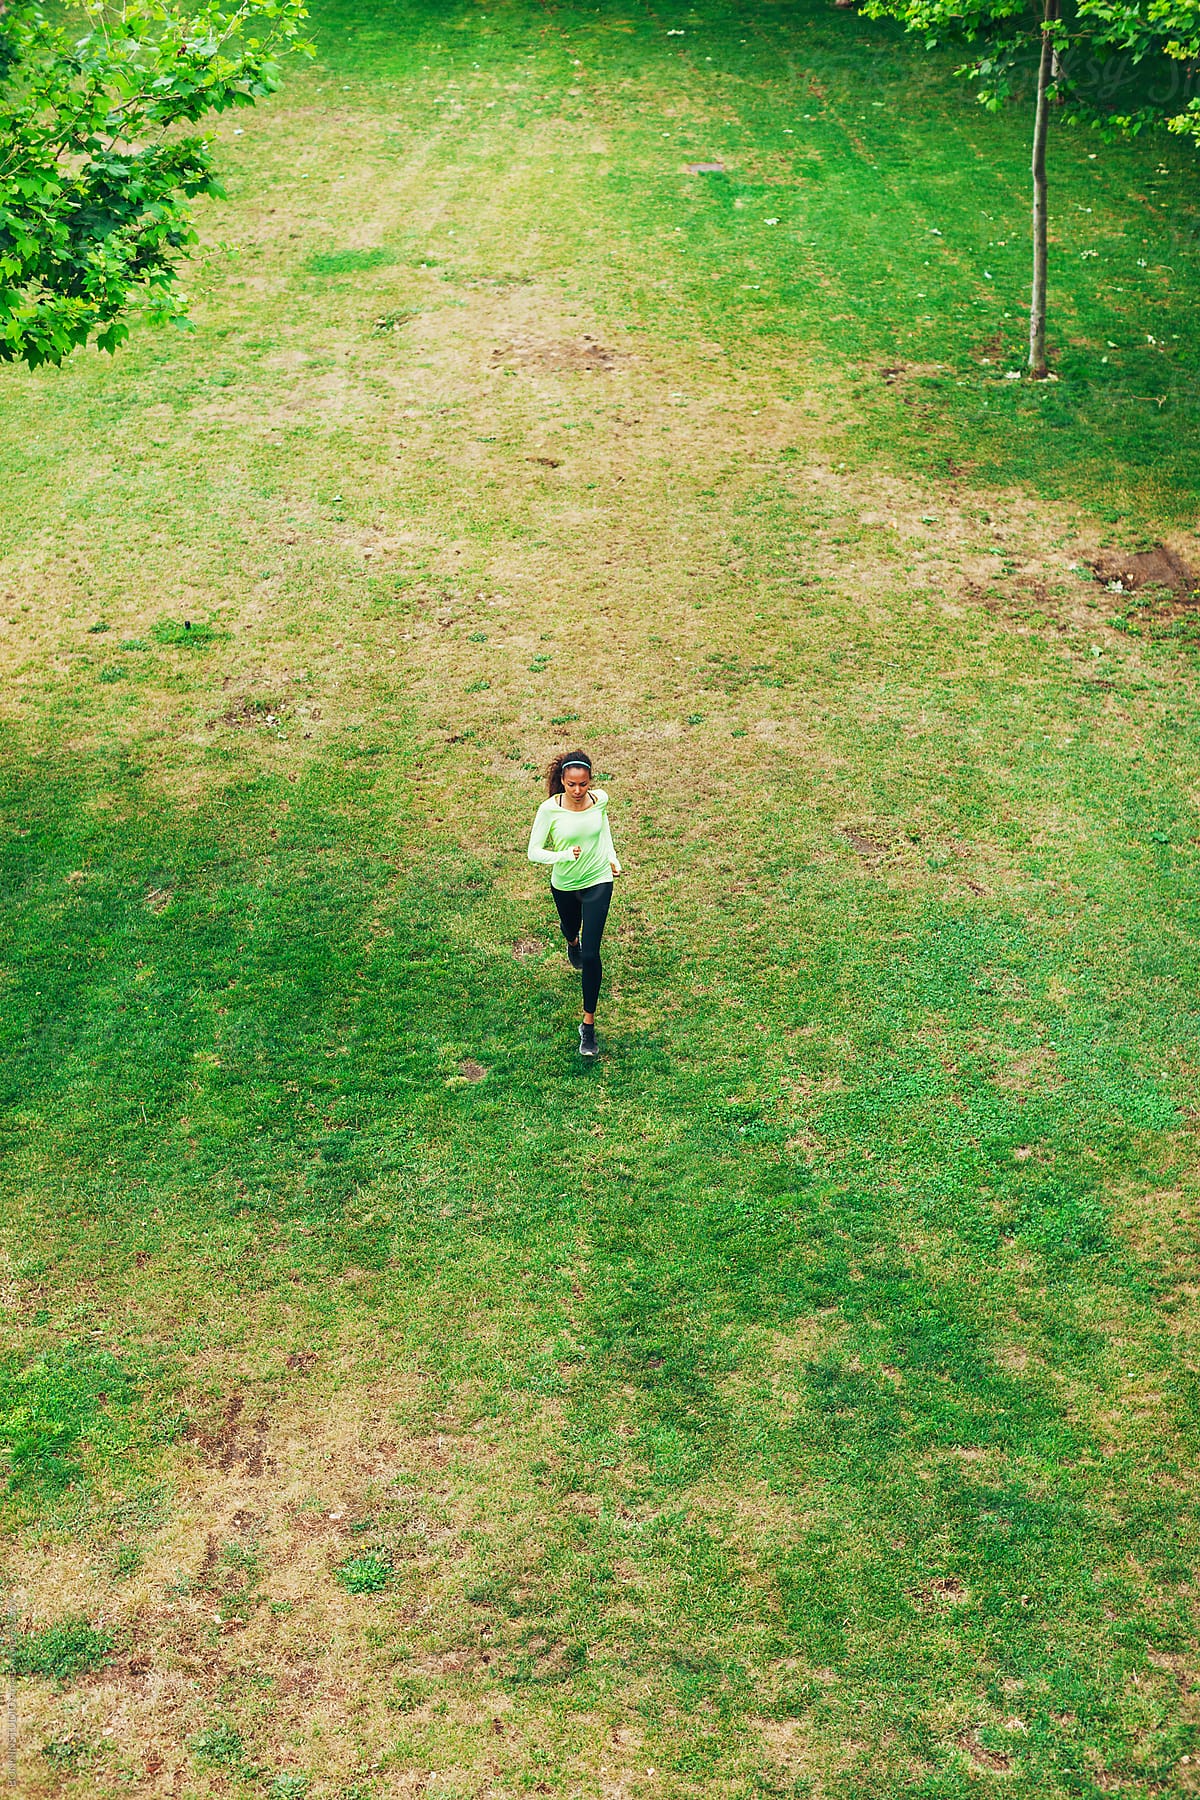 Woman Jogging In A Park Near The City by Stocksy Contributor MEM